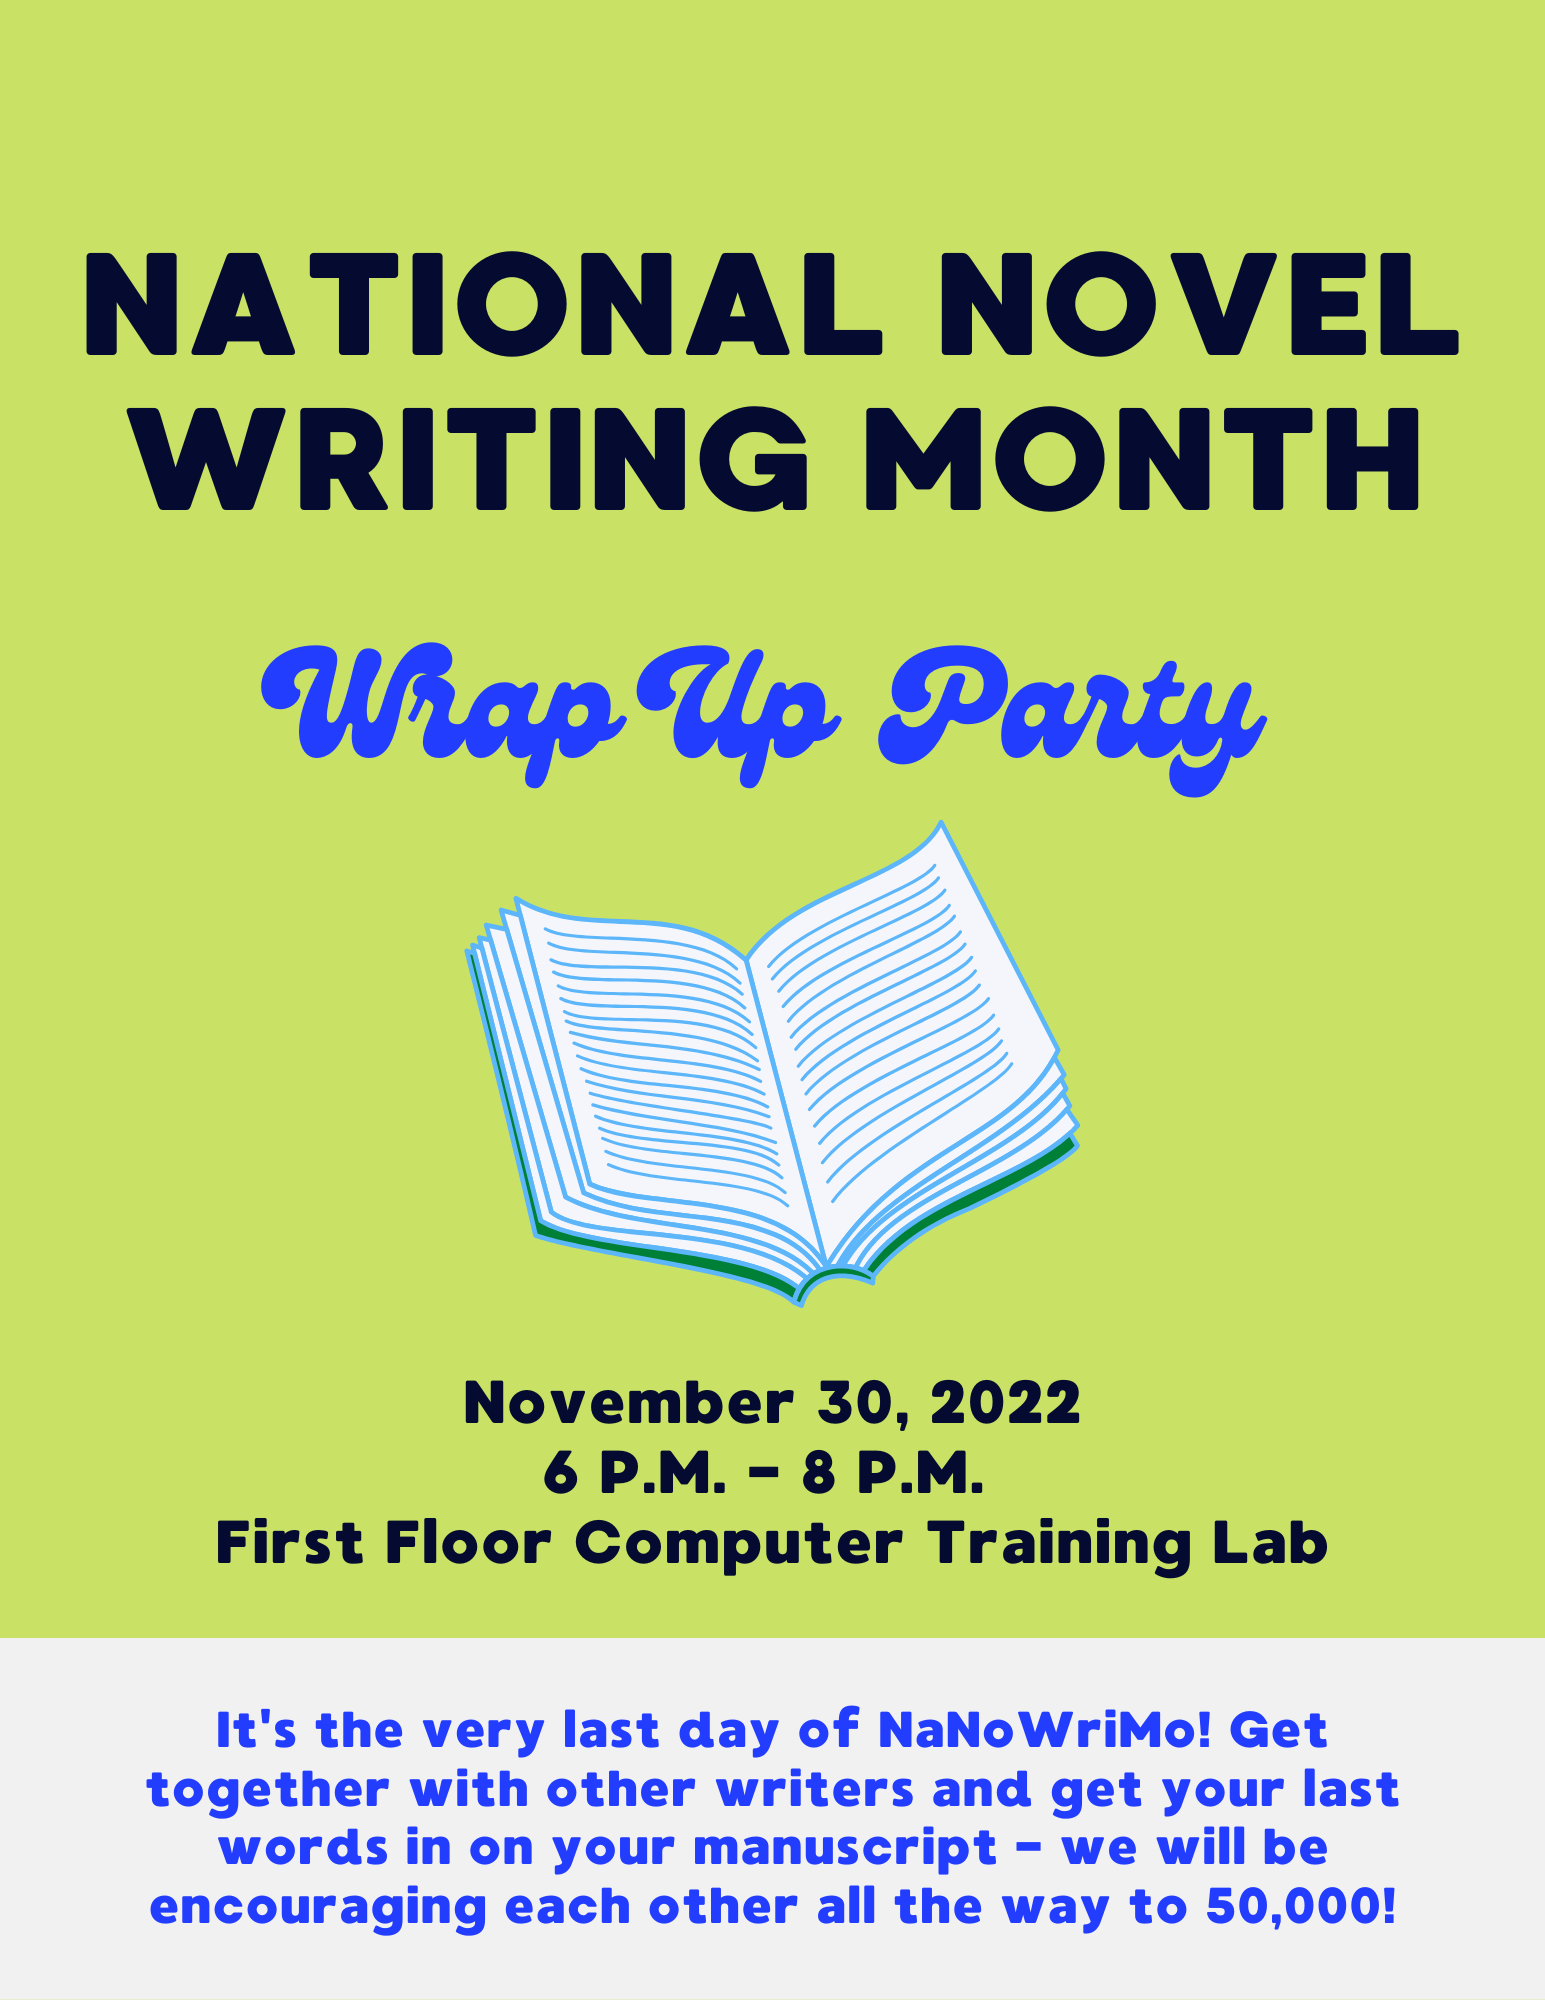 National Novel Writing Month Wrap Up Party: November 30, 2022 from 6:00 p.m. - 8:00 p.m. 